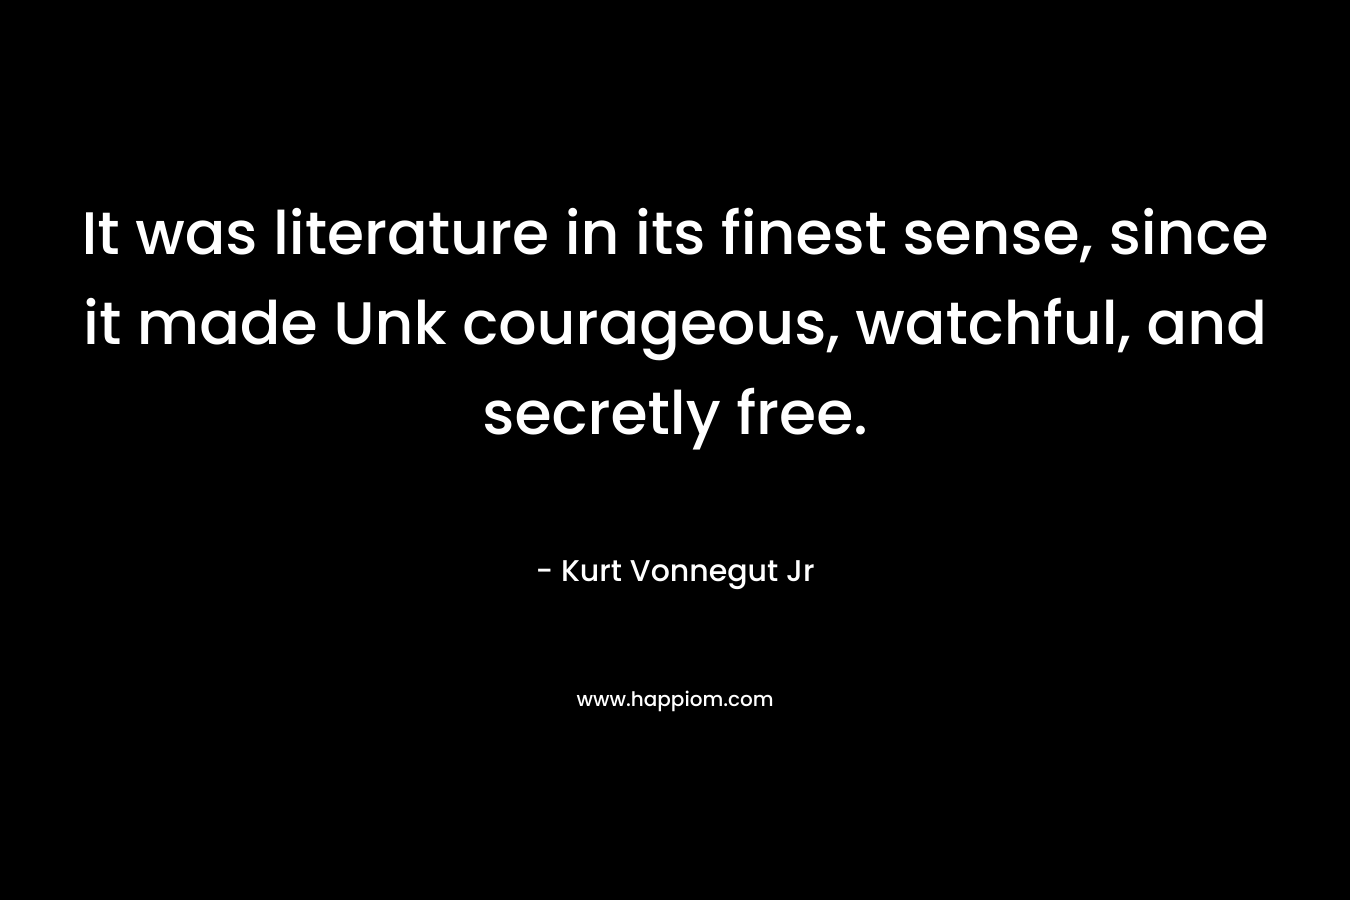 It was literature in its finest sense, since it made Unk courageous, watchful, and secretly free.